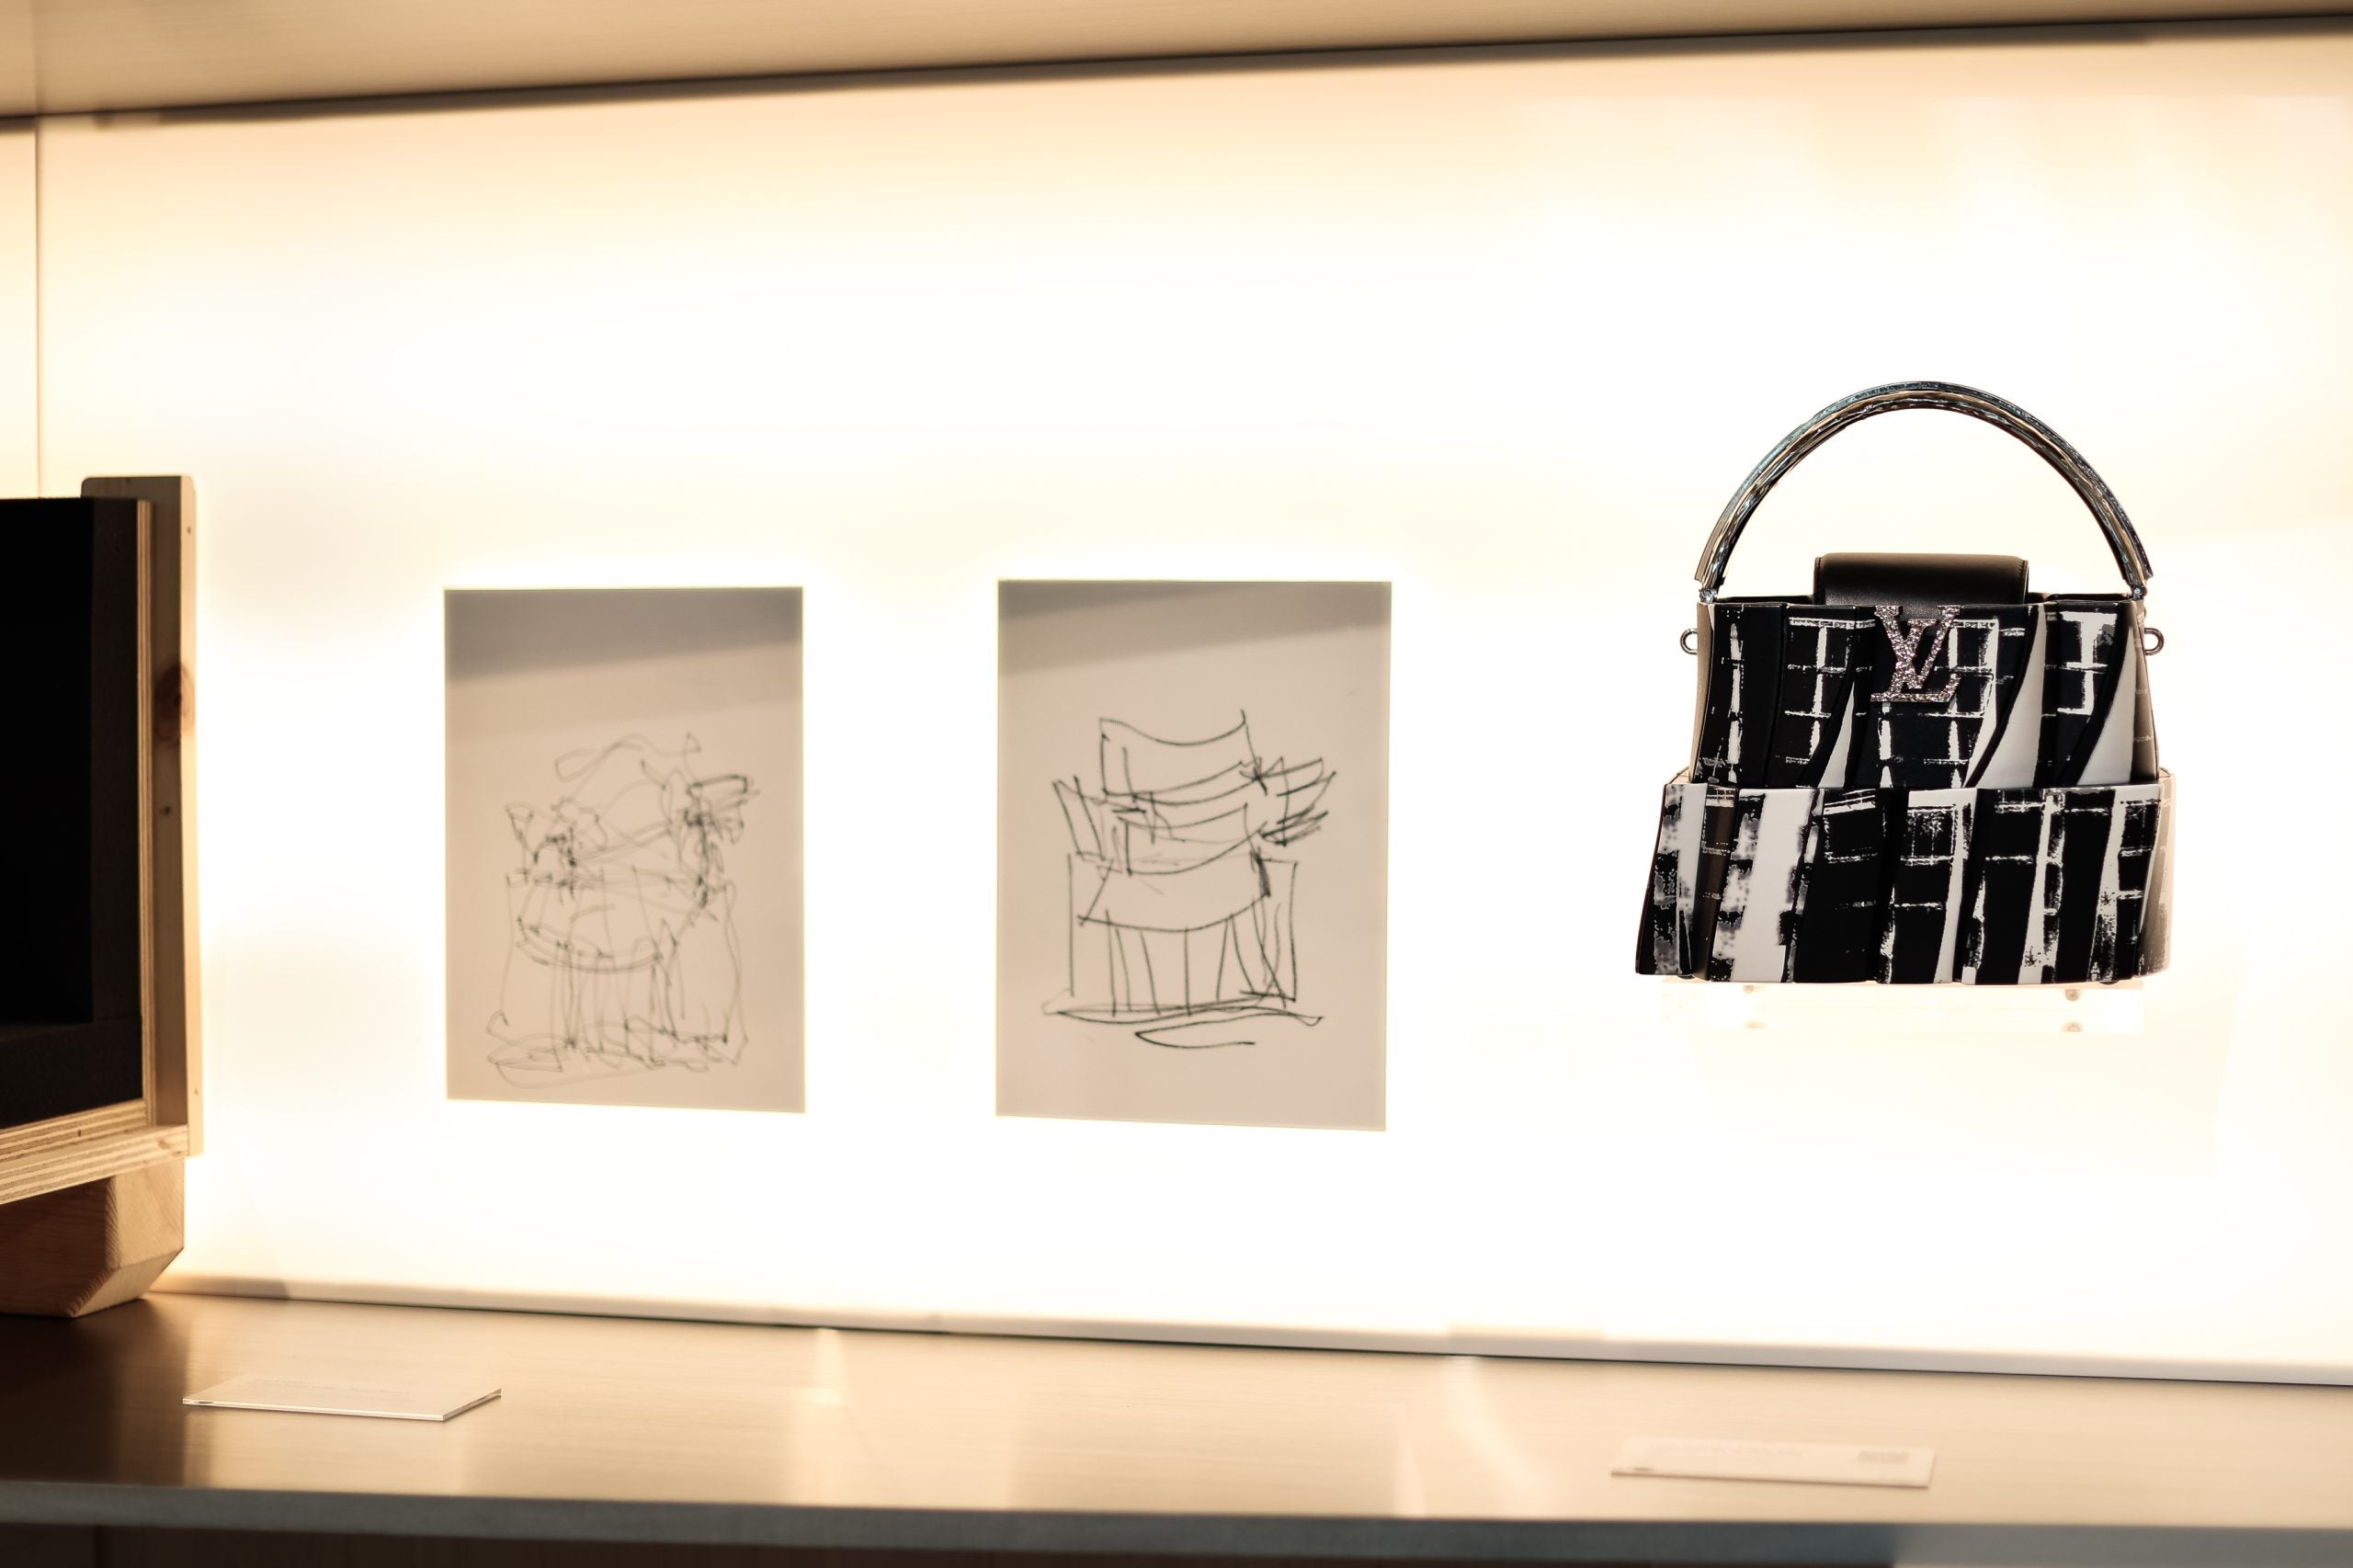 A Look At The New Frank Gehry-Designed Louis Vuitton Handbags Debuting At Art Basel Miami